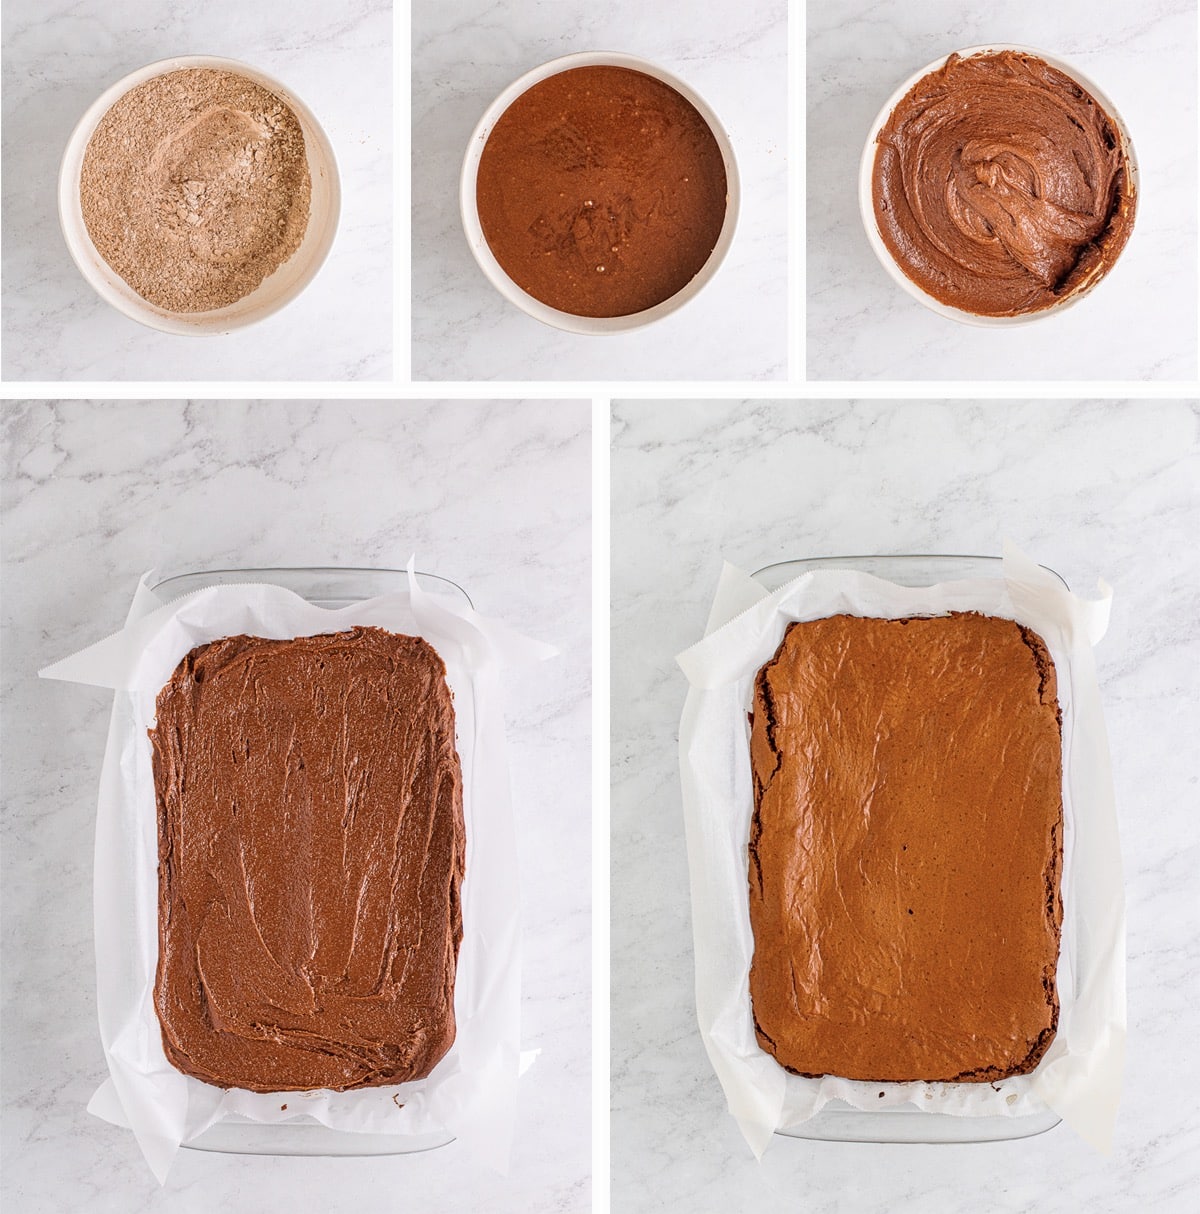 COLLAGE OF IMAGES SHOWING HOW TO MAKE THE BROWNIES AND BAKE THEM FOR BROWNIE WITH STRAWBERRY FROSTING